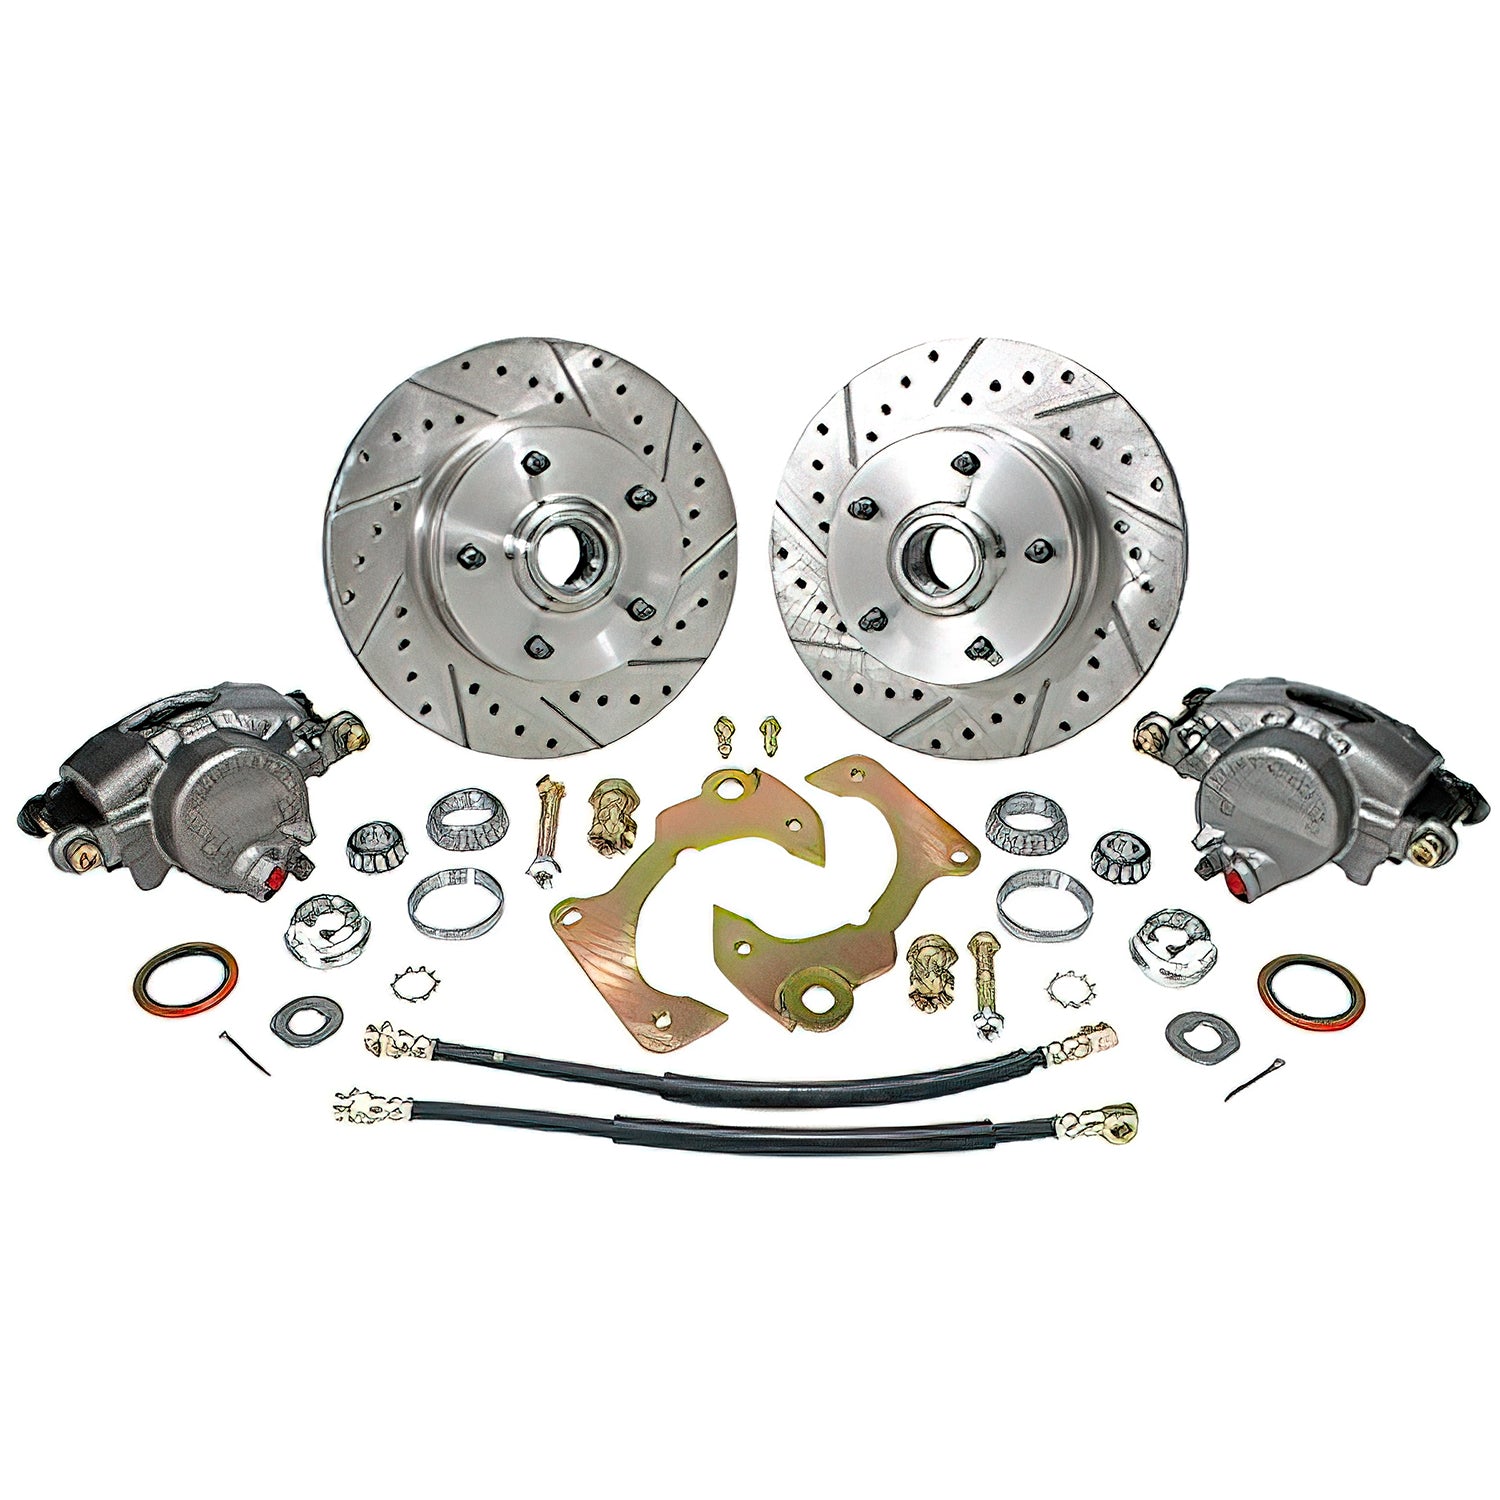 Image of disc brake conversion kit products